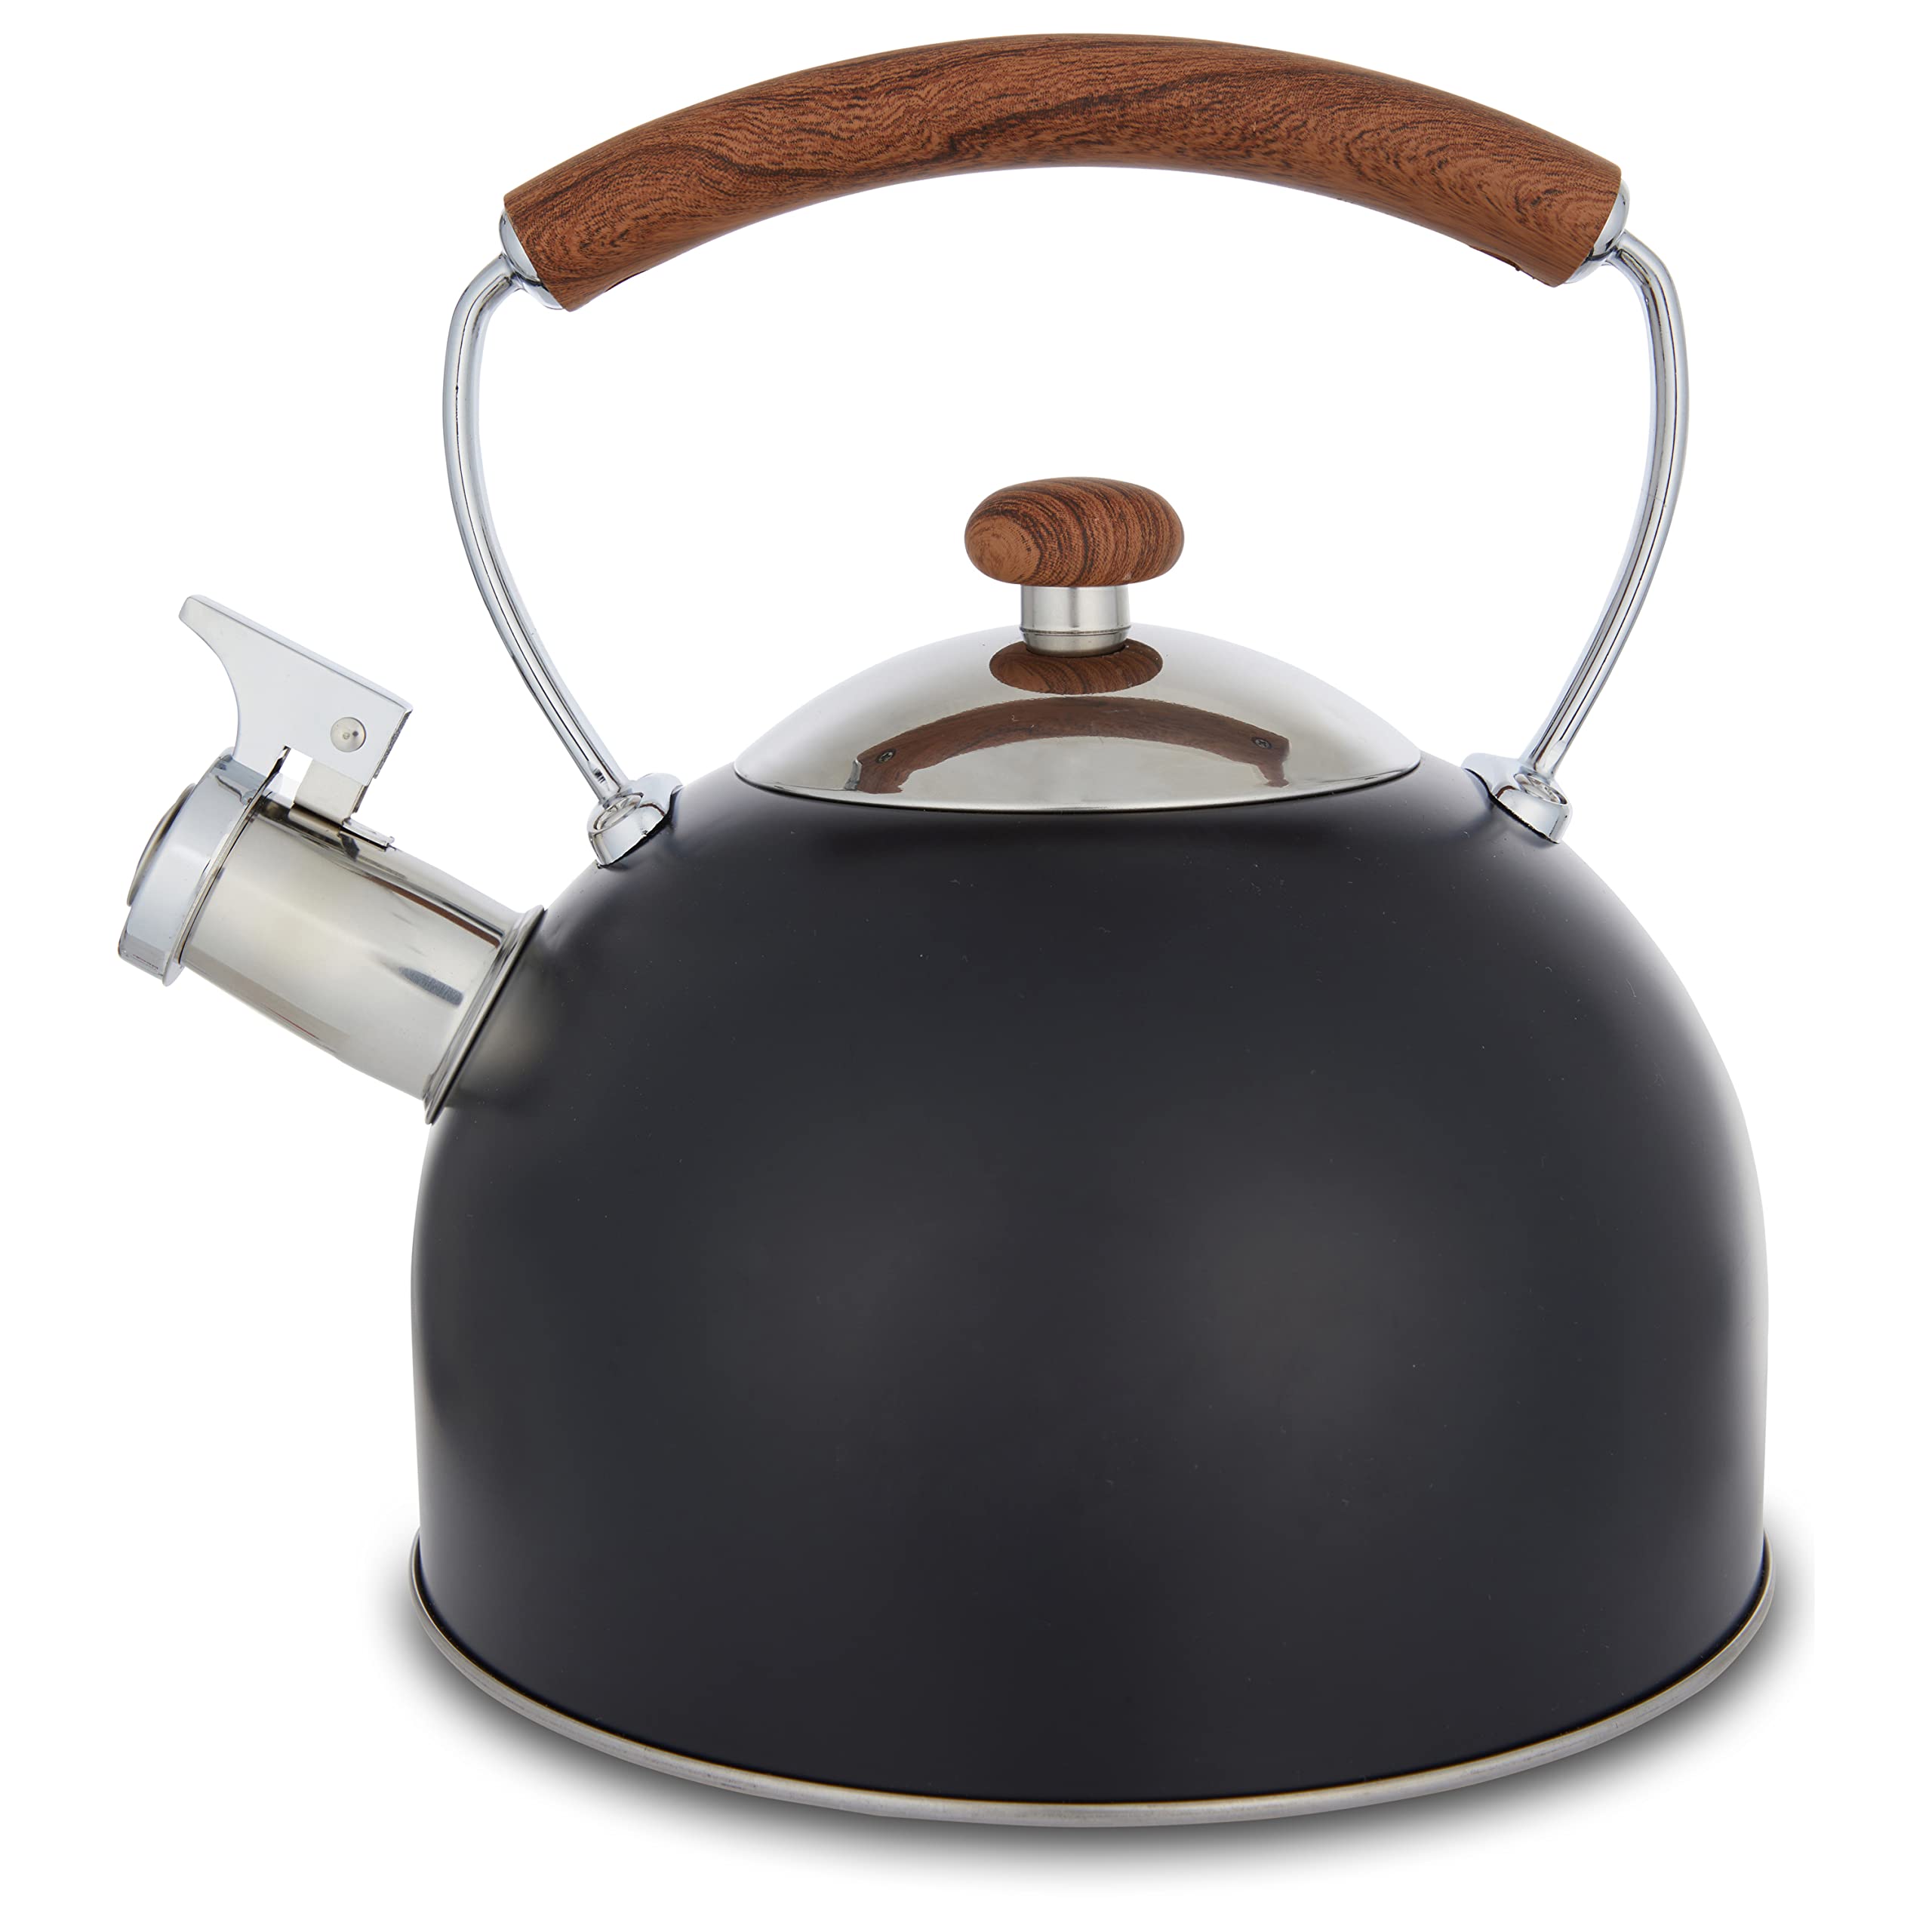 Phantom Chef Tea Kettle | 2 Quart, 2.7 L | Stainless Steel | Stay-Cool Touch Handle | Whistle Sounds when Water Boils | Hand wash | Anti-Rust | Teakettle Teapot All Heat Sources | Full Handle (Green)